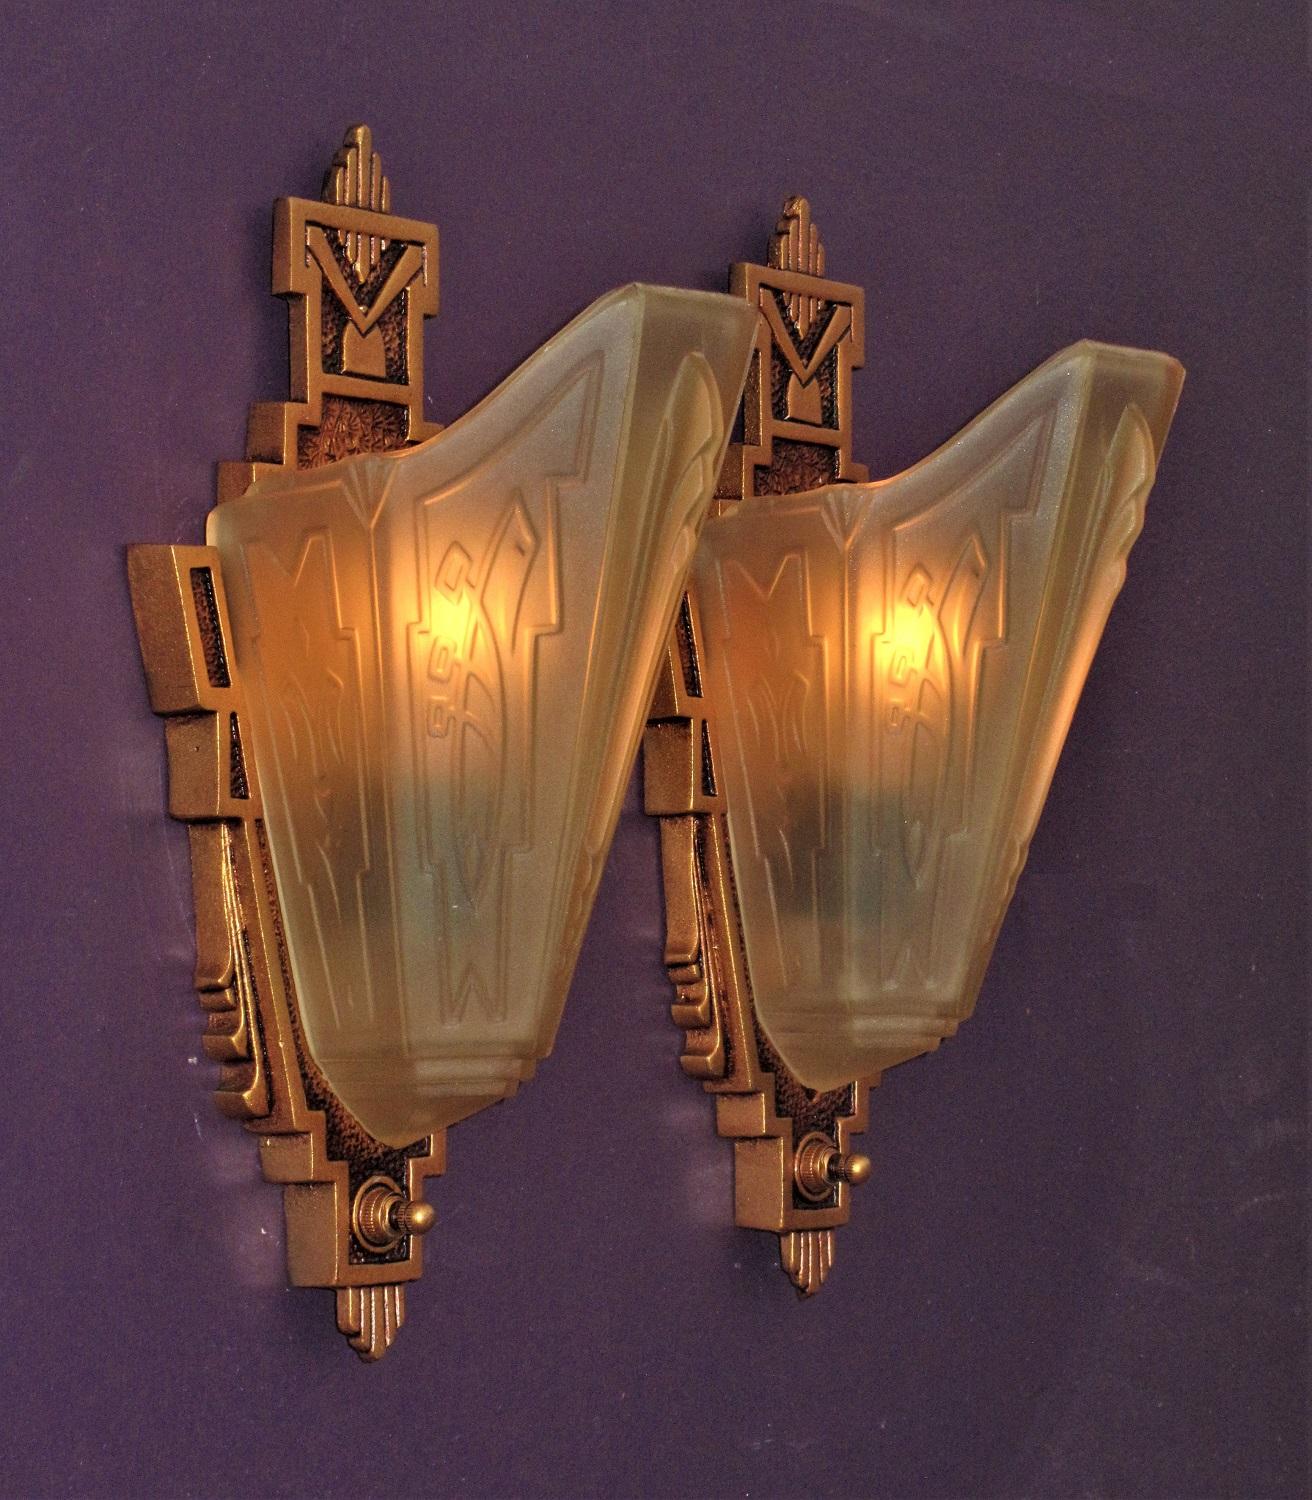 2 pair available, priced per pair.
Late 1920s through mid-1930s wall lighting fixtures with a subtle art deco and American Southwest influences. Highly sought after and prized Consolidated Glass Co. shades adorn these refurbished cast iron sconce